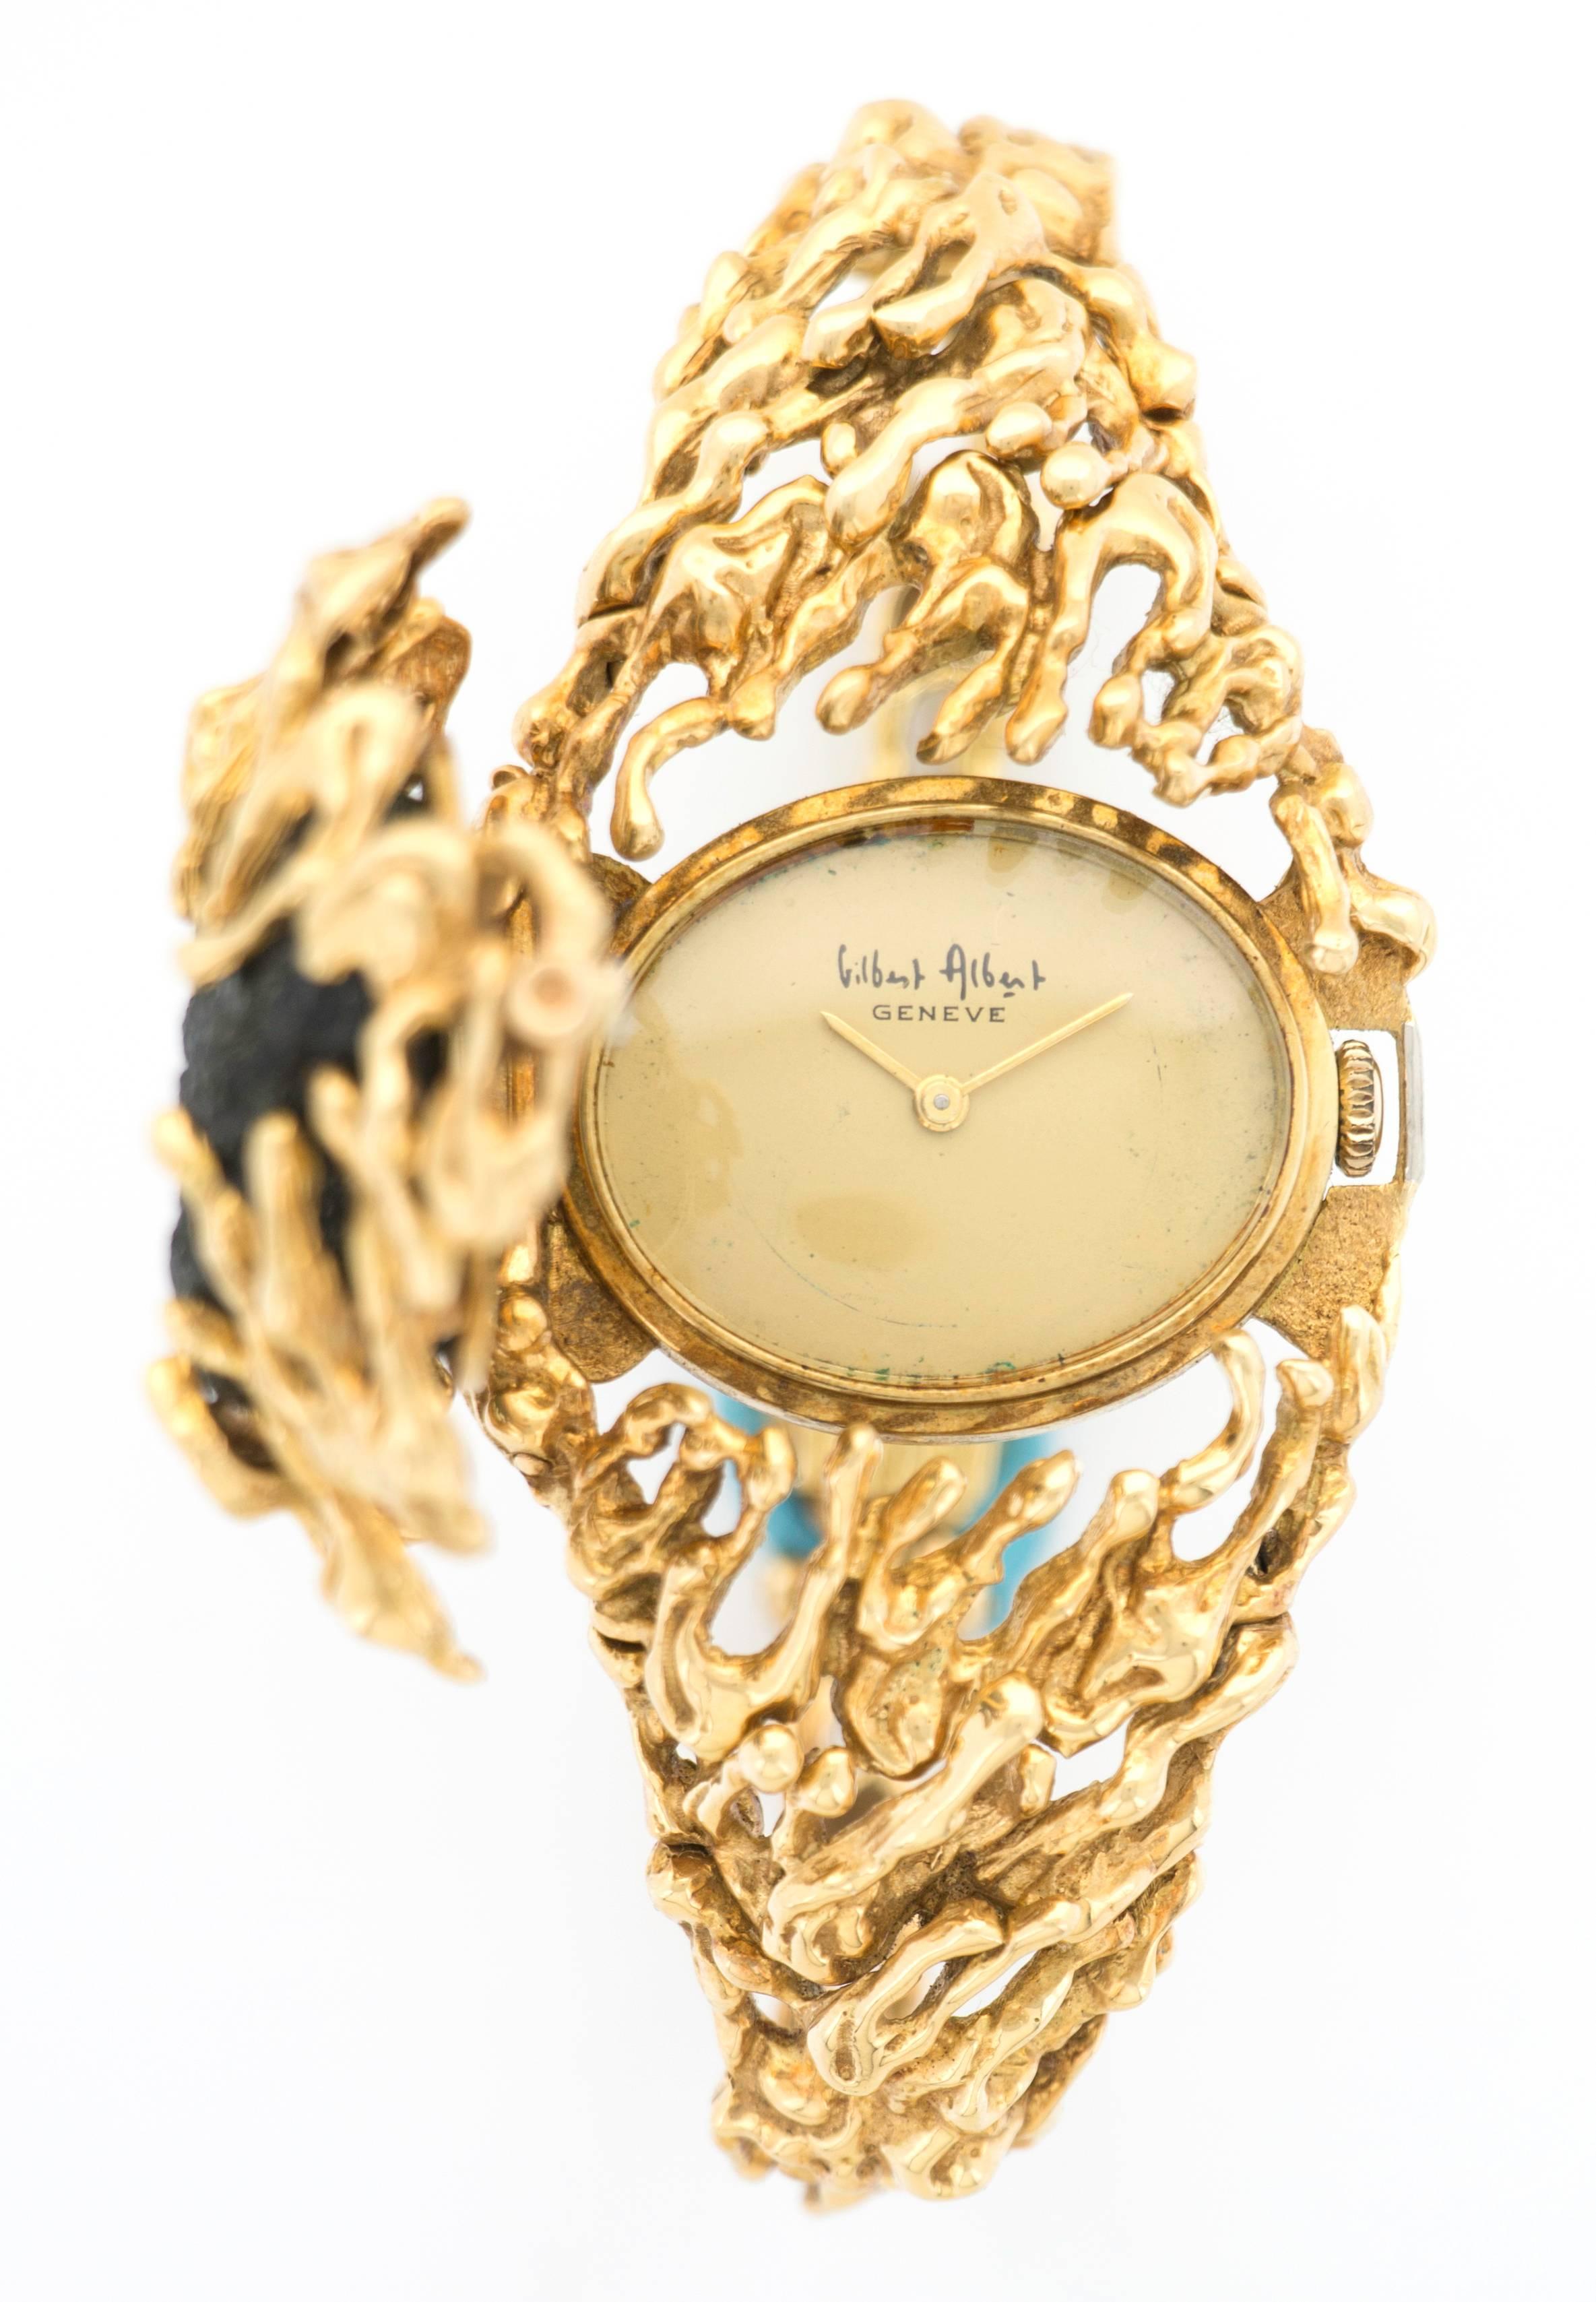 An incredibly rare and extraordinary yellow gold bracelet watch by esteemed jewelry designer Gilbert Albert. Known to create some of the most unique and creative pieces for Patek Philippe, Omega and his own jewelry company. Completely unique